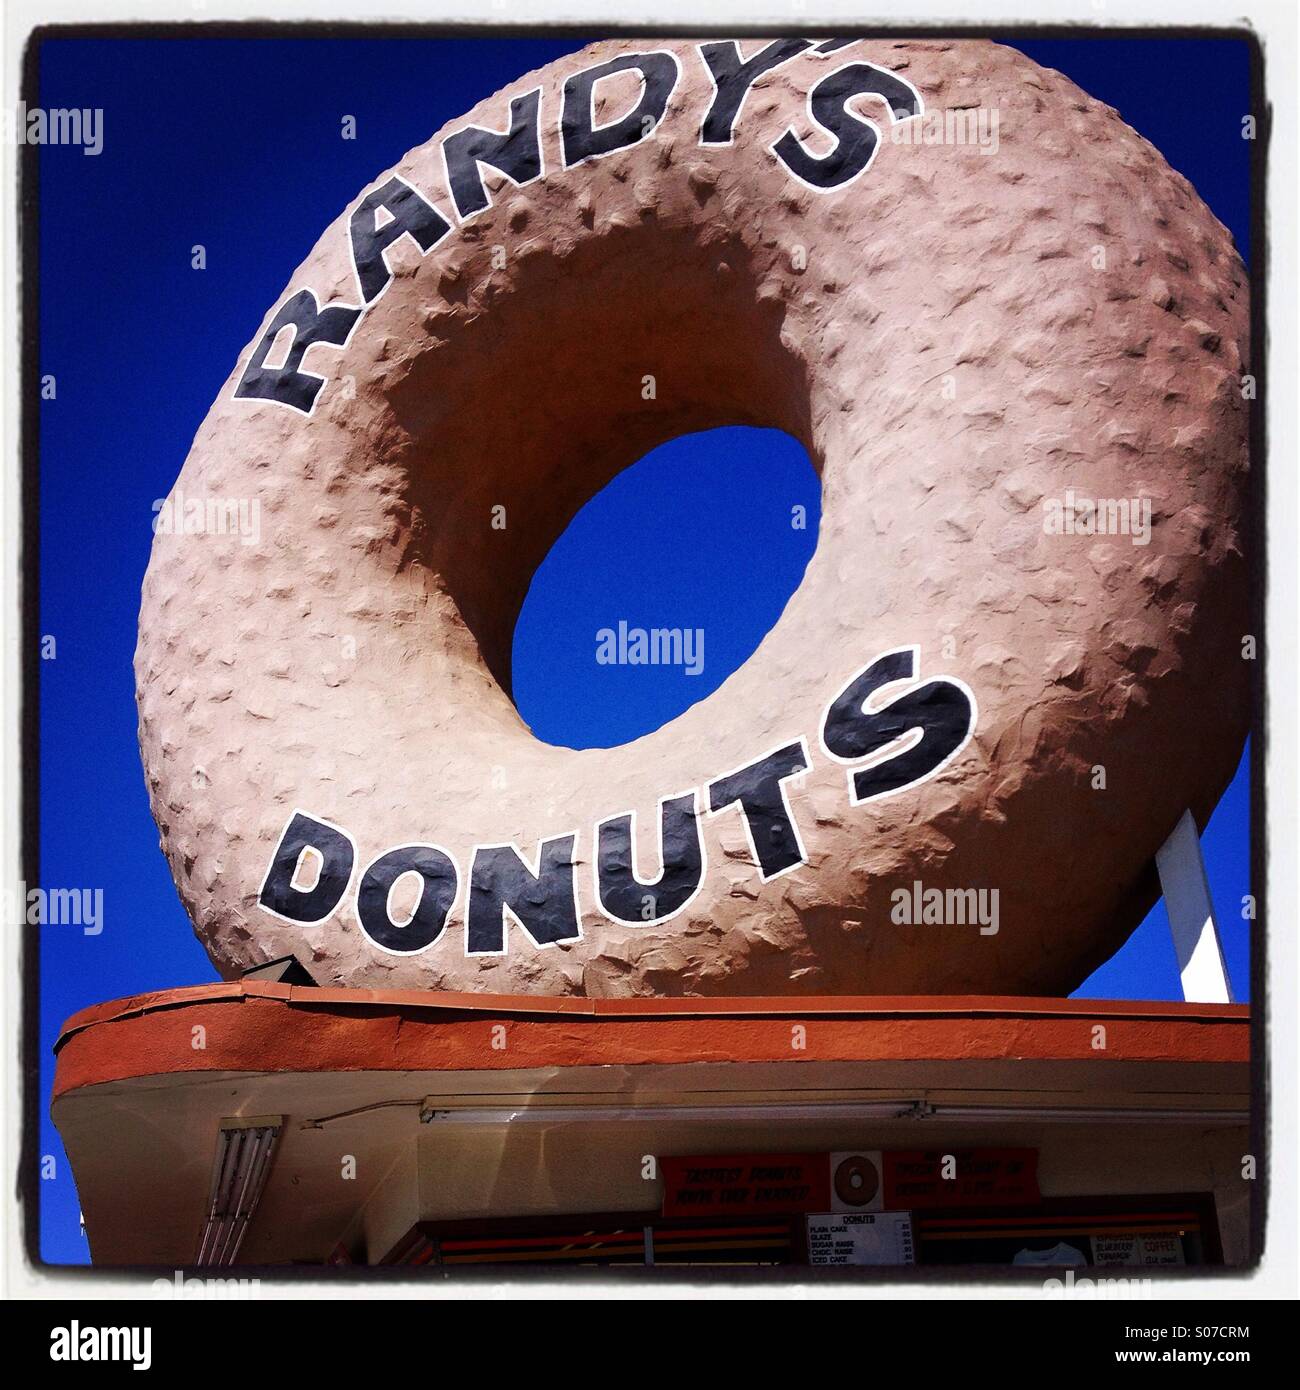 Giant donut on top of Randy's Donuts, a famous doughnut shop and bakery in Los Angeles, California, USA. Stock Photo